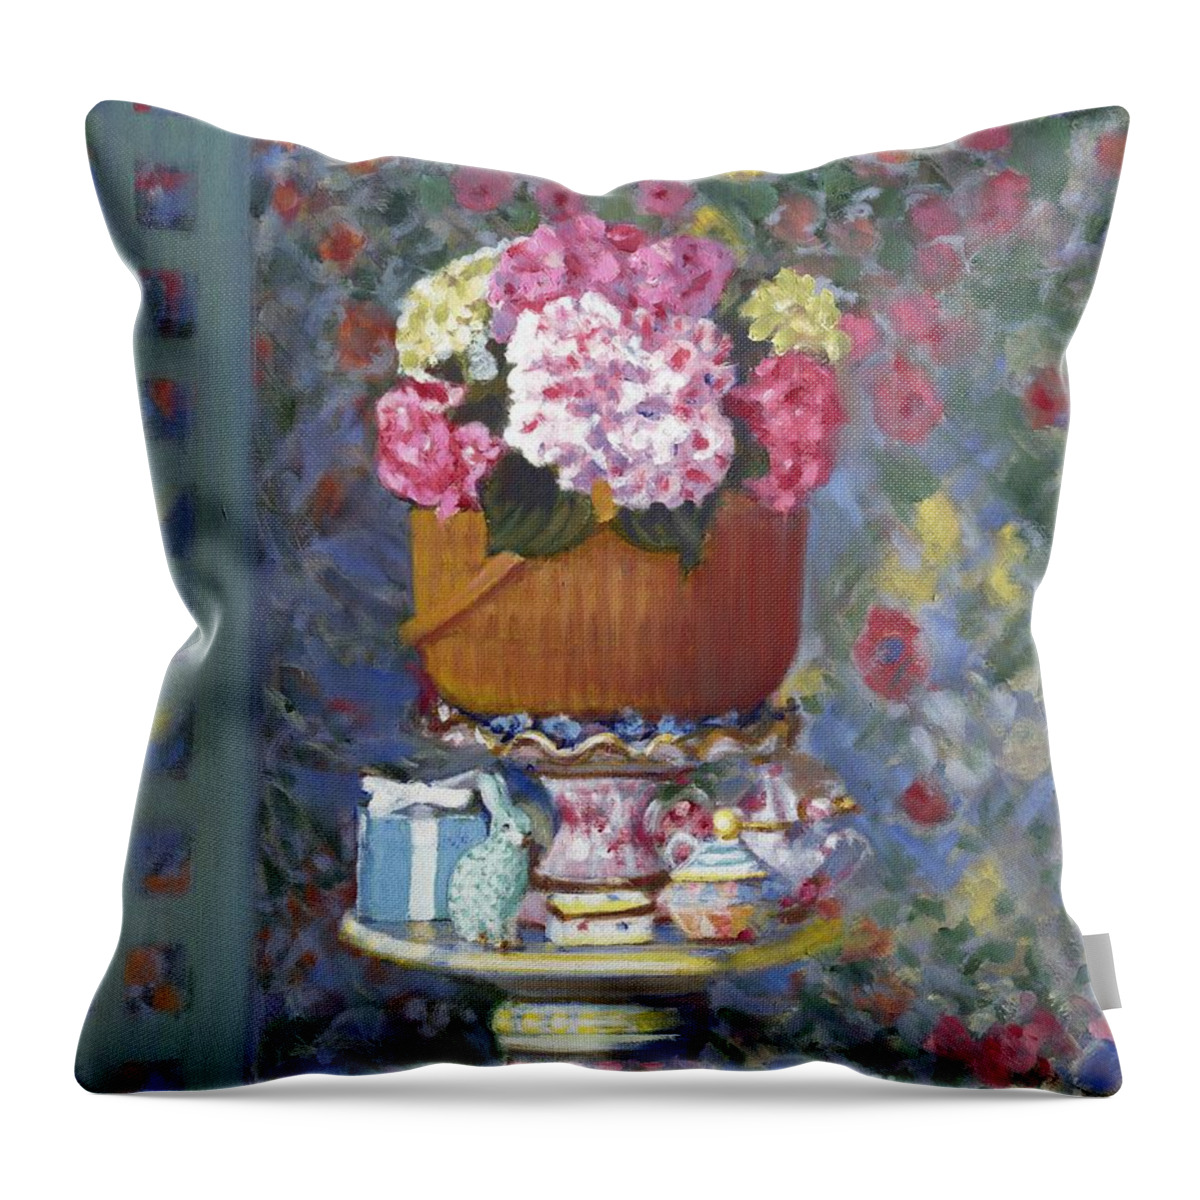 Still Life Throw Pillow featuring the painting Nantucket Flower Parade by Candace Lovely